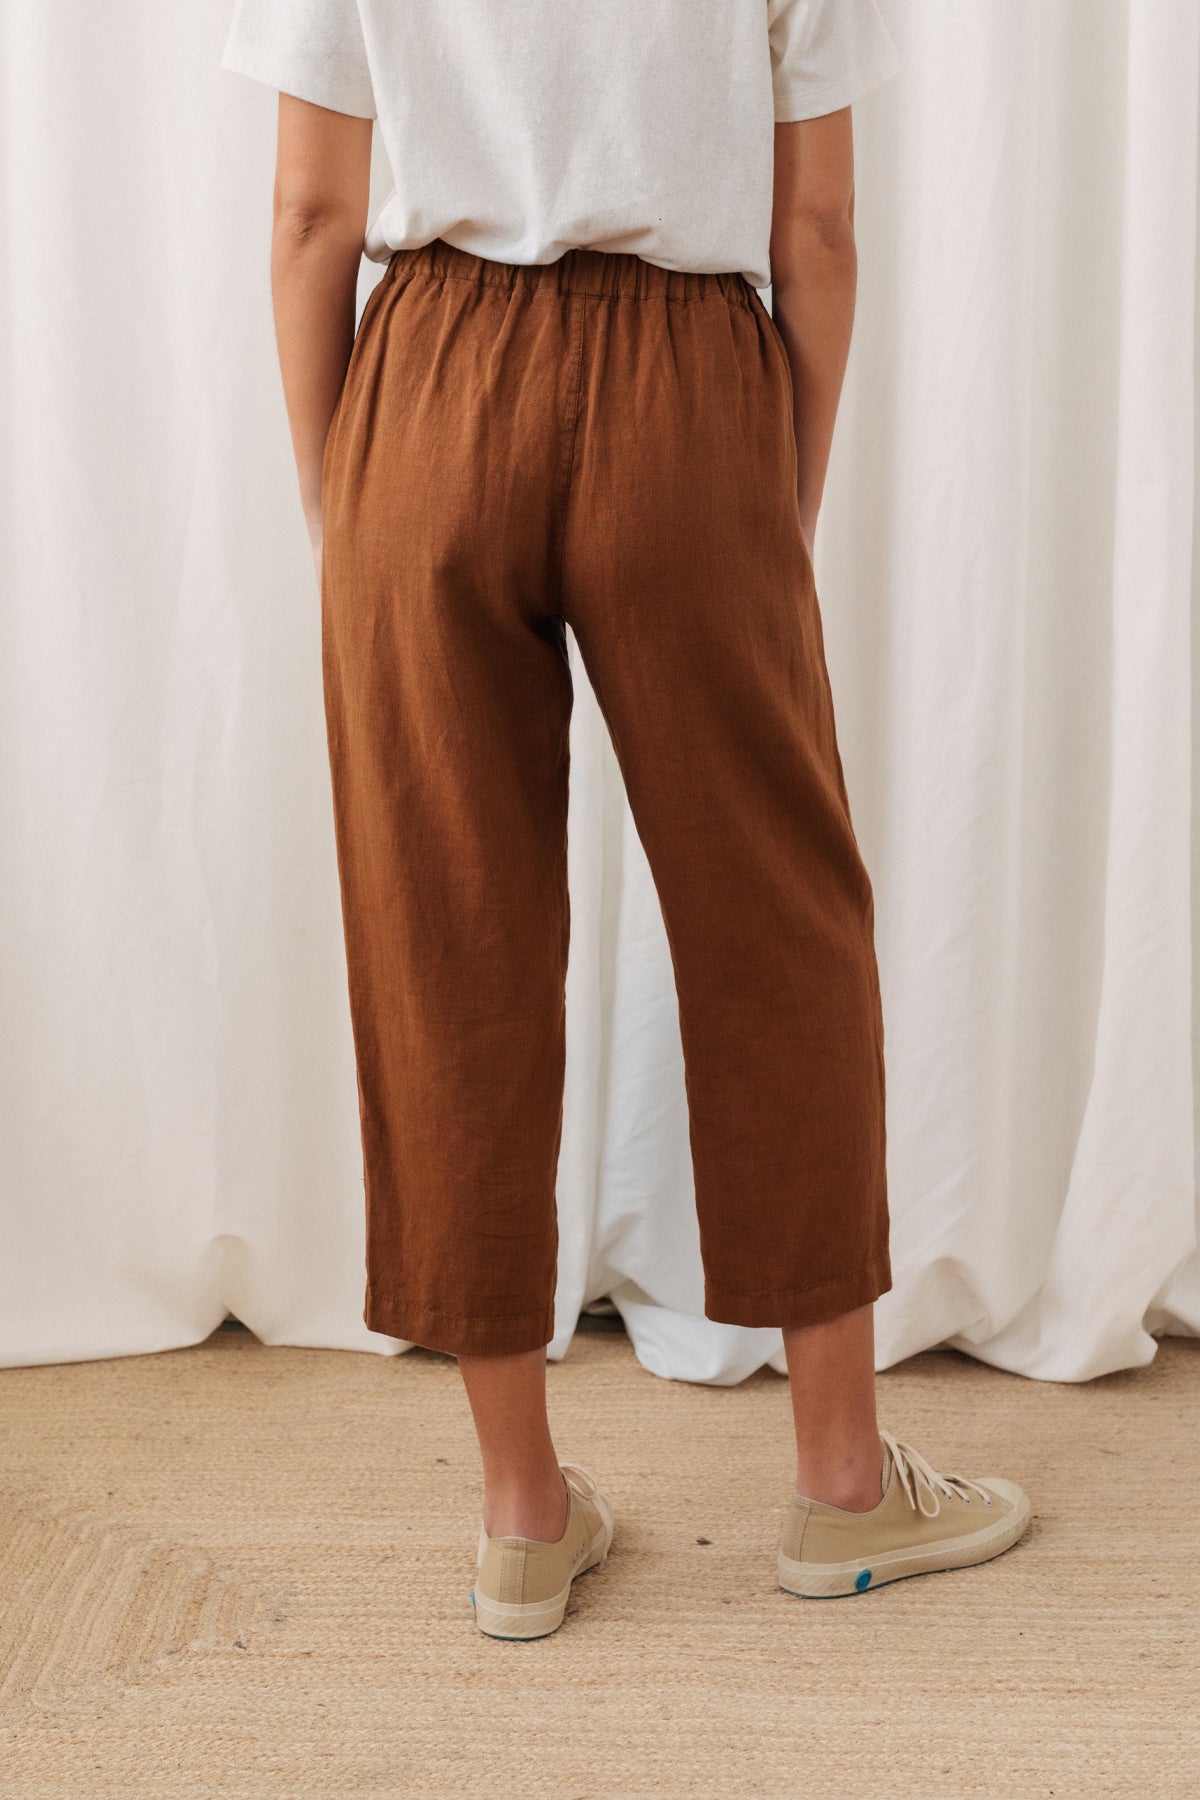 TWOTHIRDS sustainable linen trousers